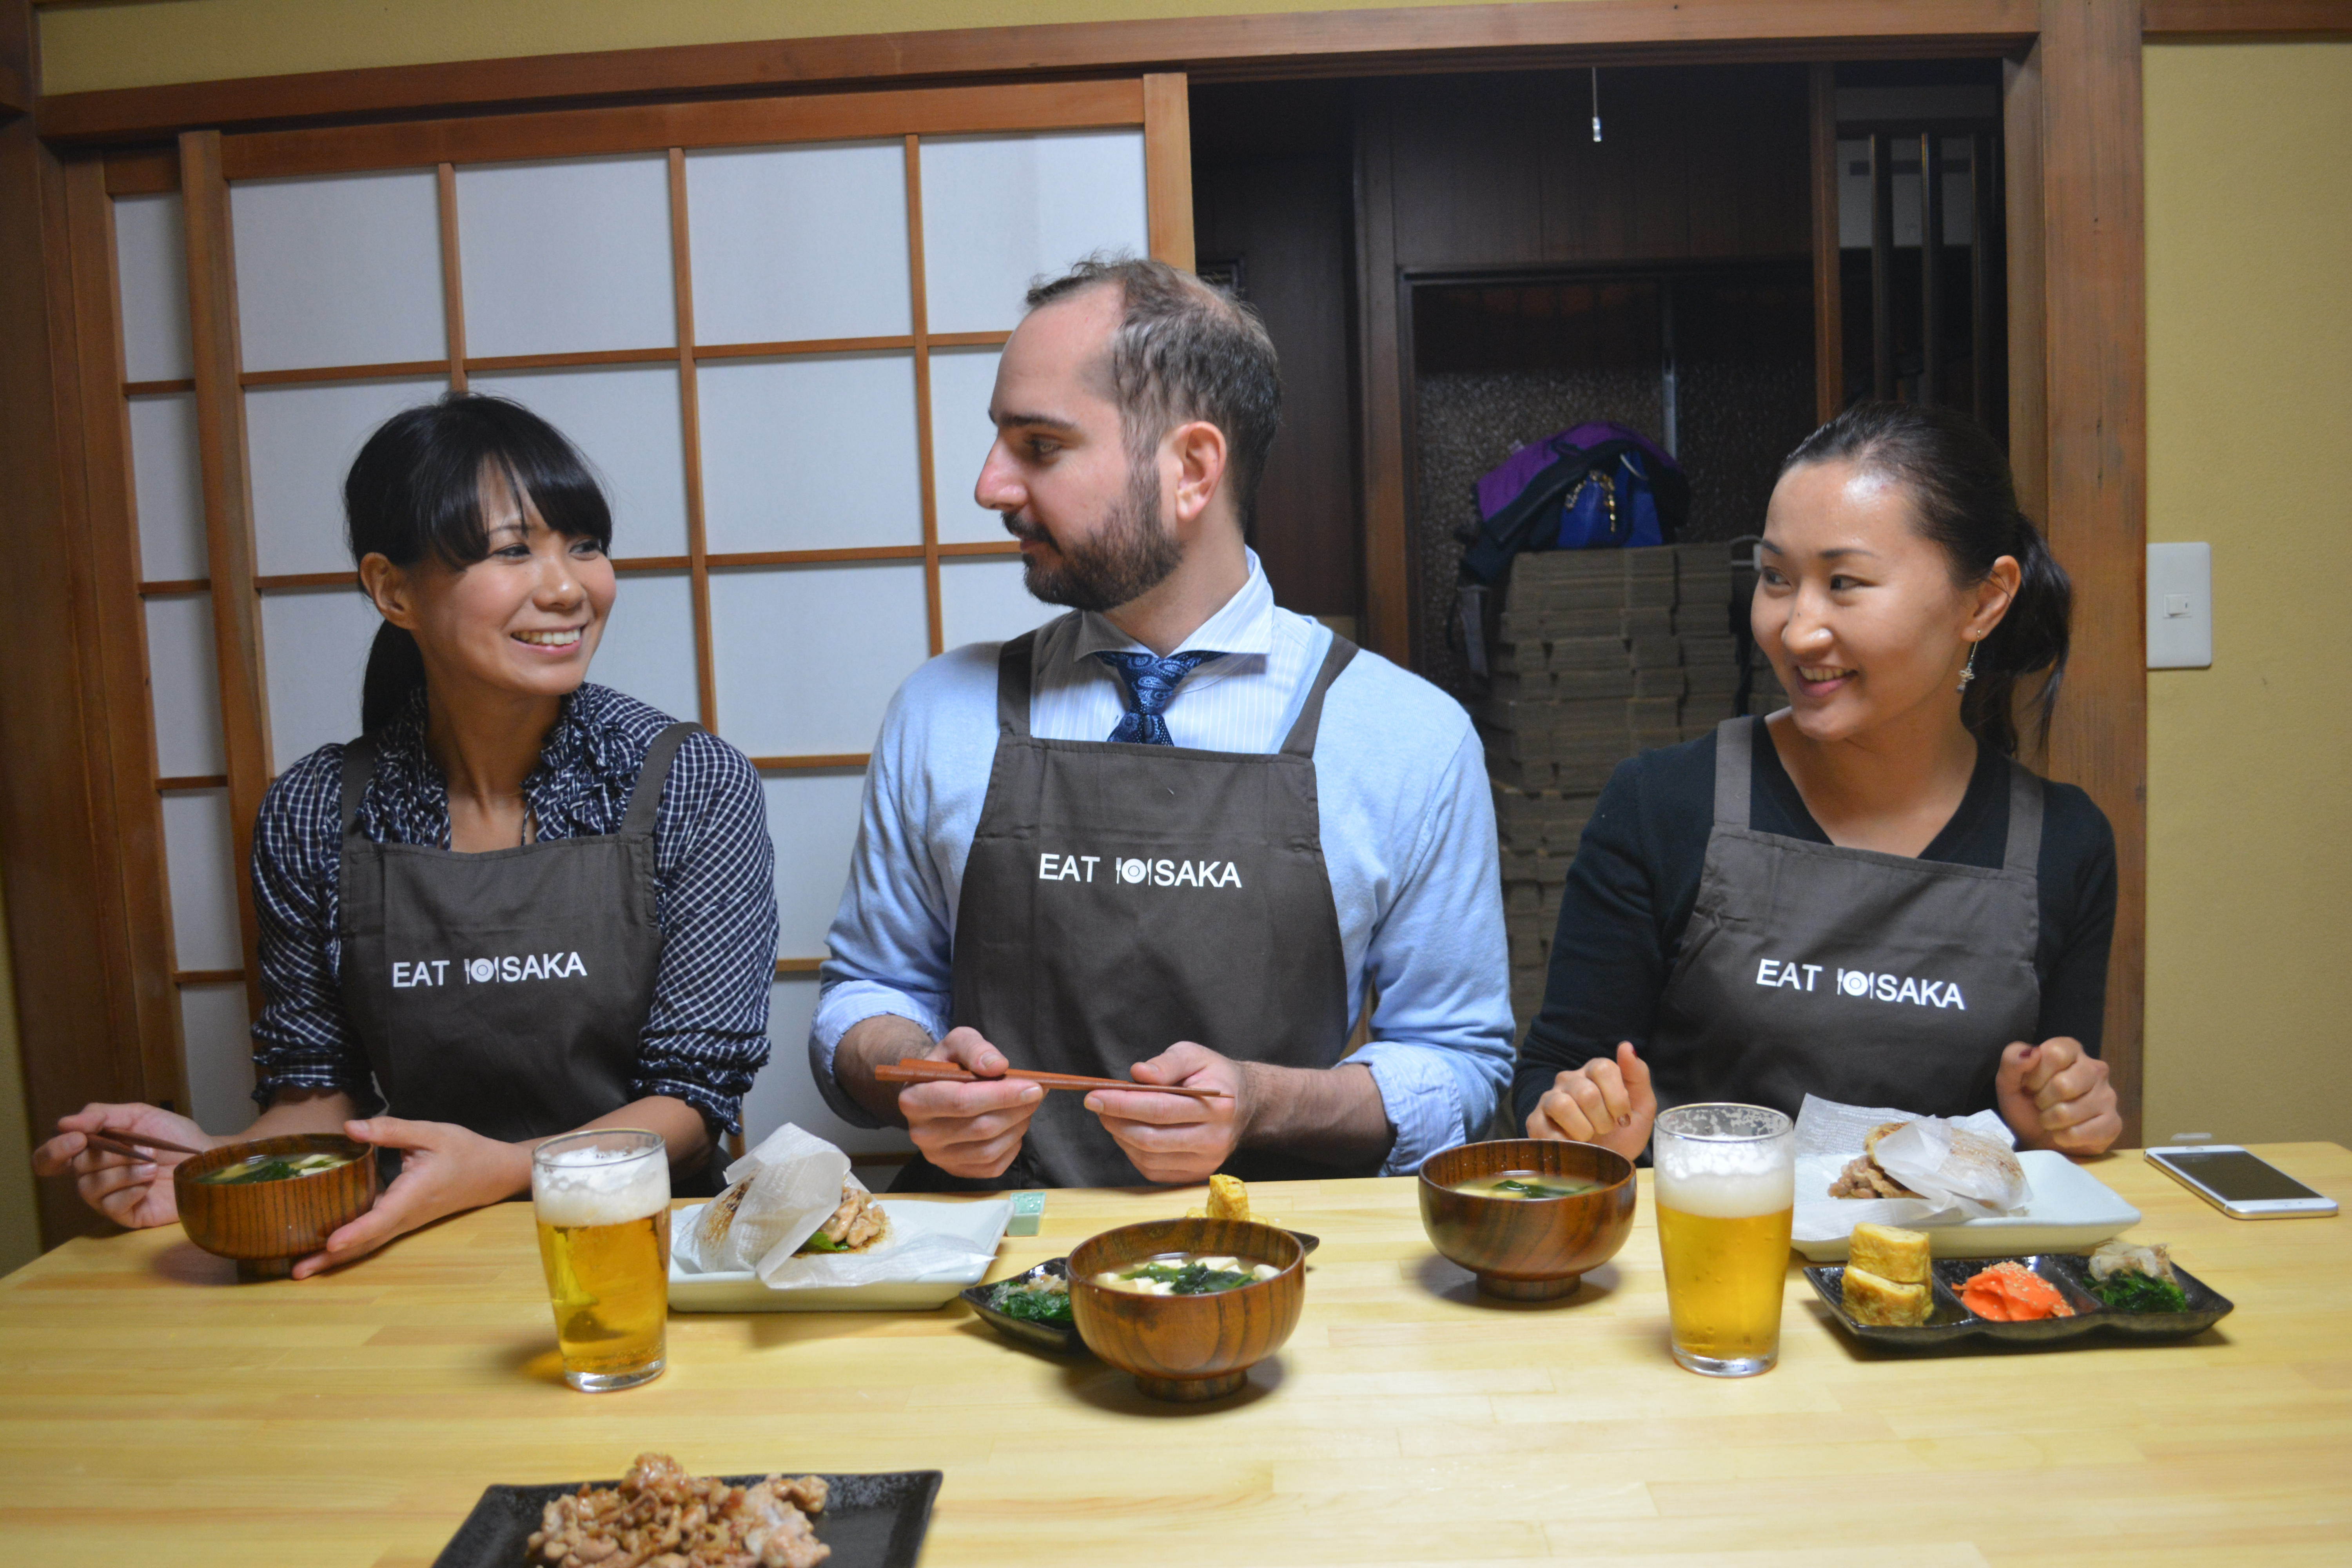 Bon appetit: Arisa Daggers (left) sits down with her students for a meal after an Eat Osaka class. | J.J. O'DONOGHUE